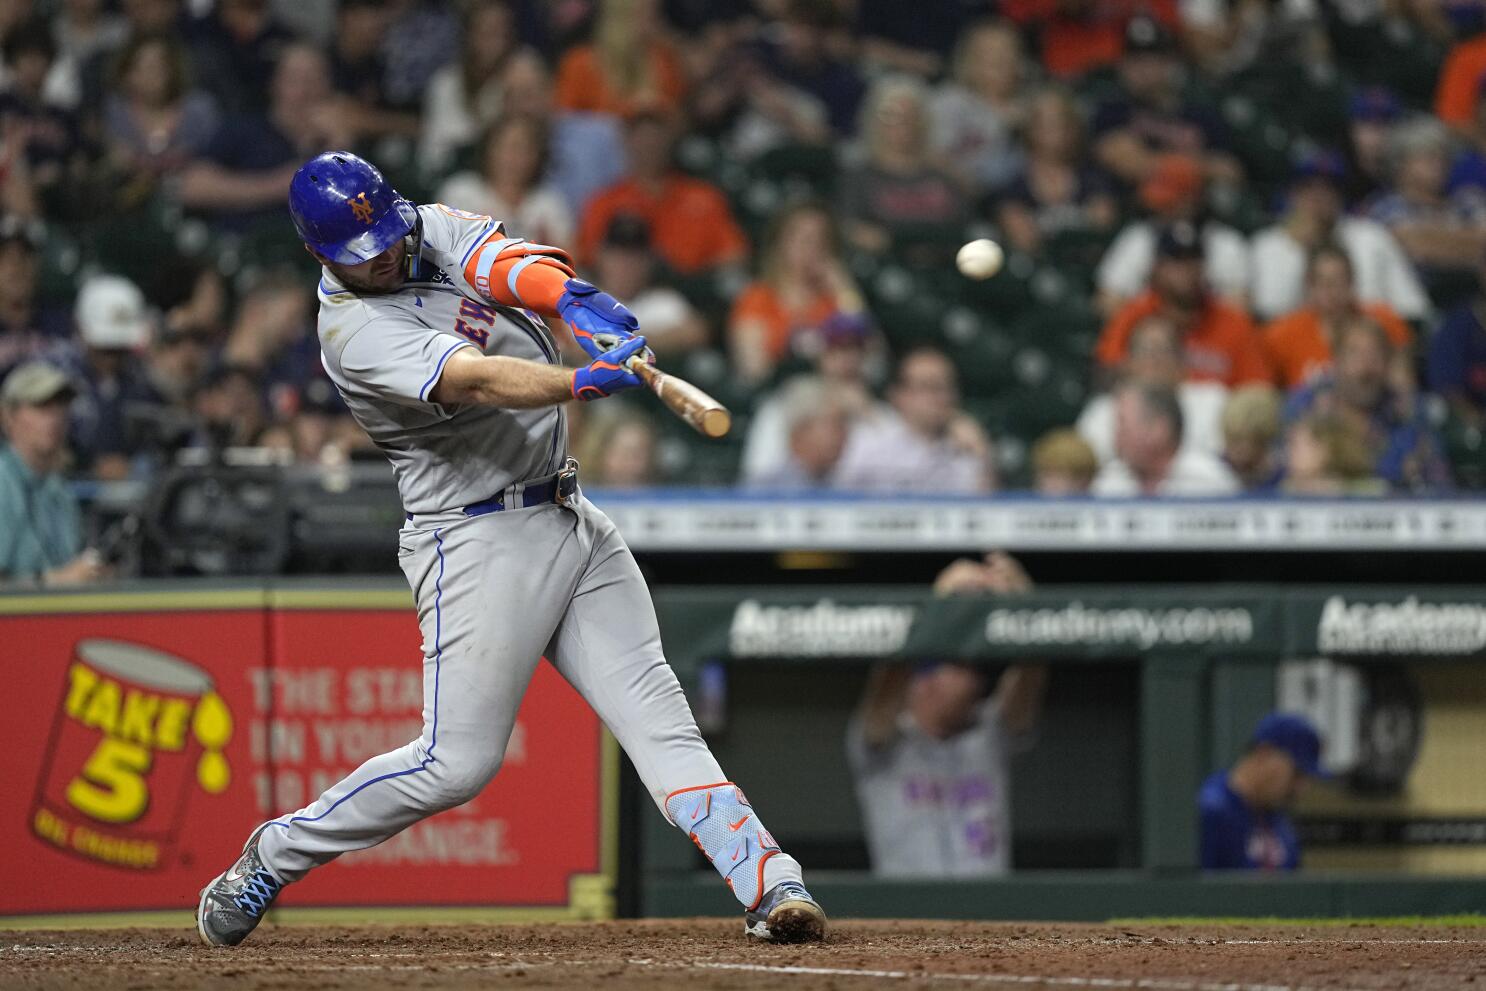 Pete Alonso to participate in Home Run Derby at All-Star Game